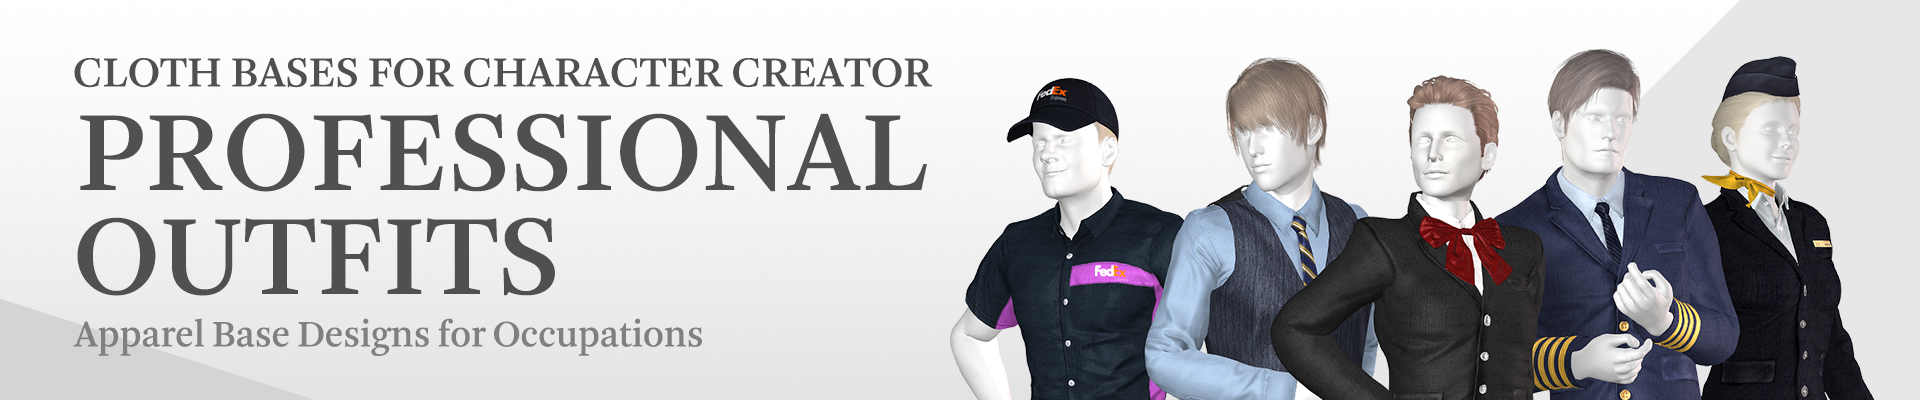 3d clothing for 3d character creator - Professional Outfits